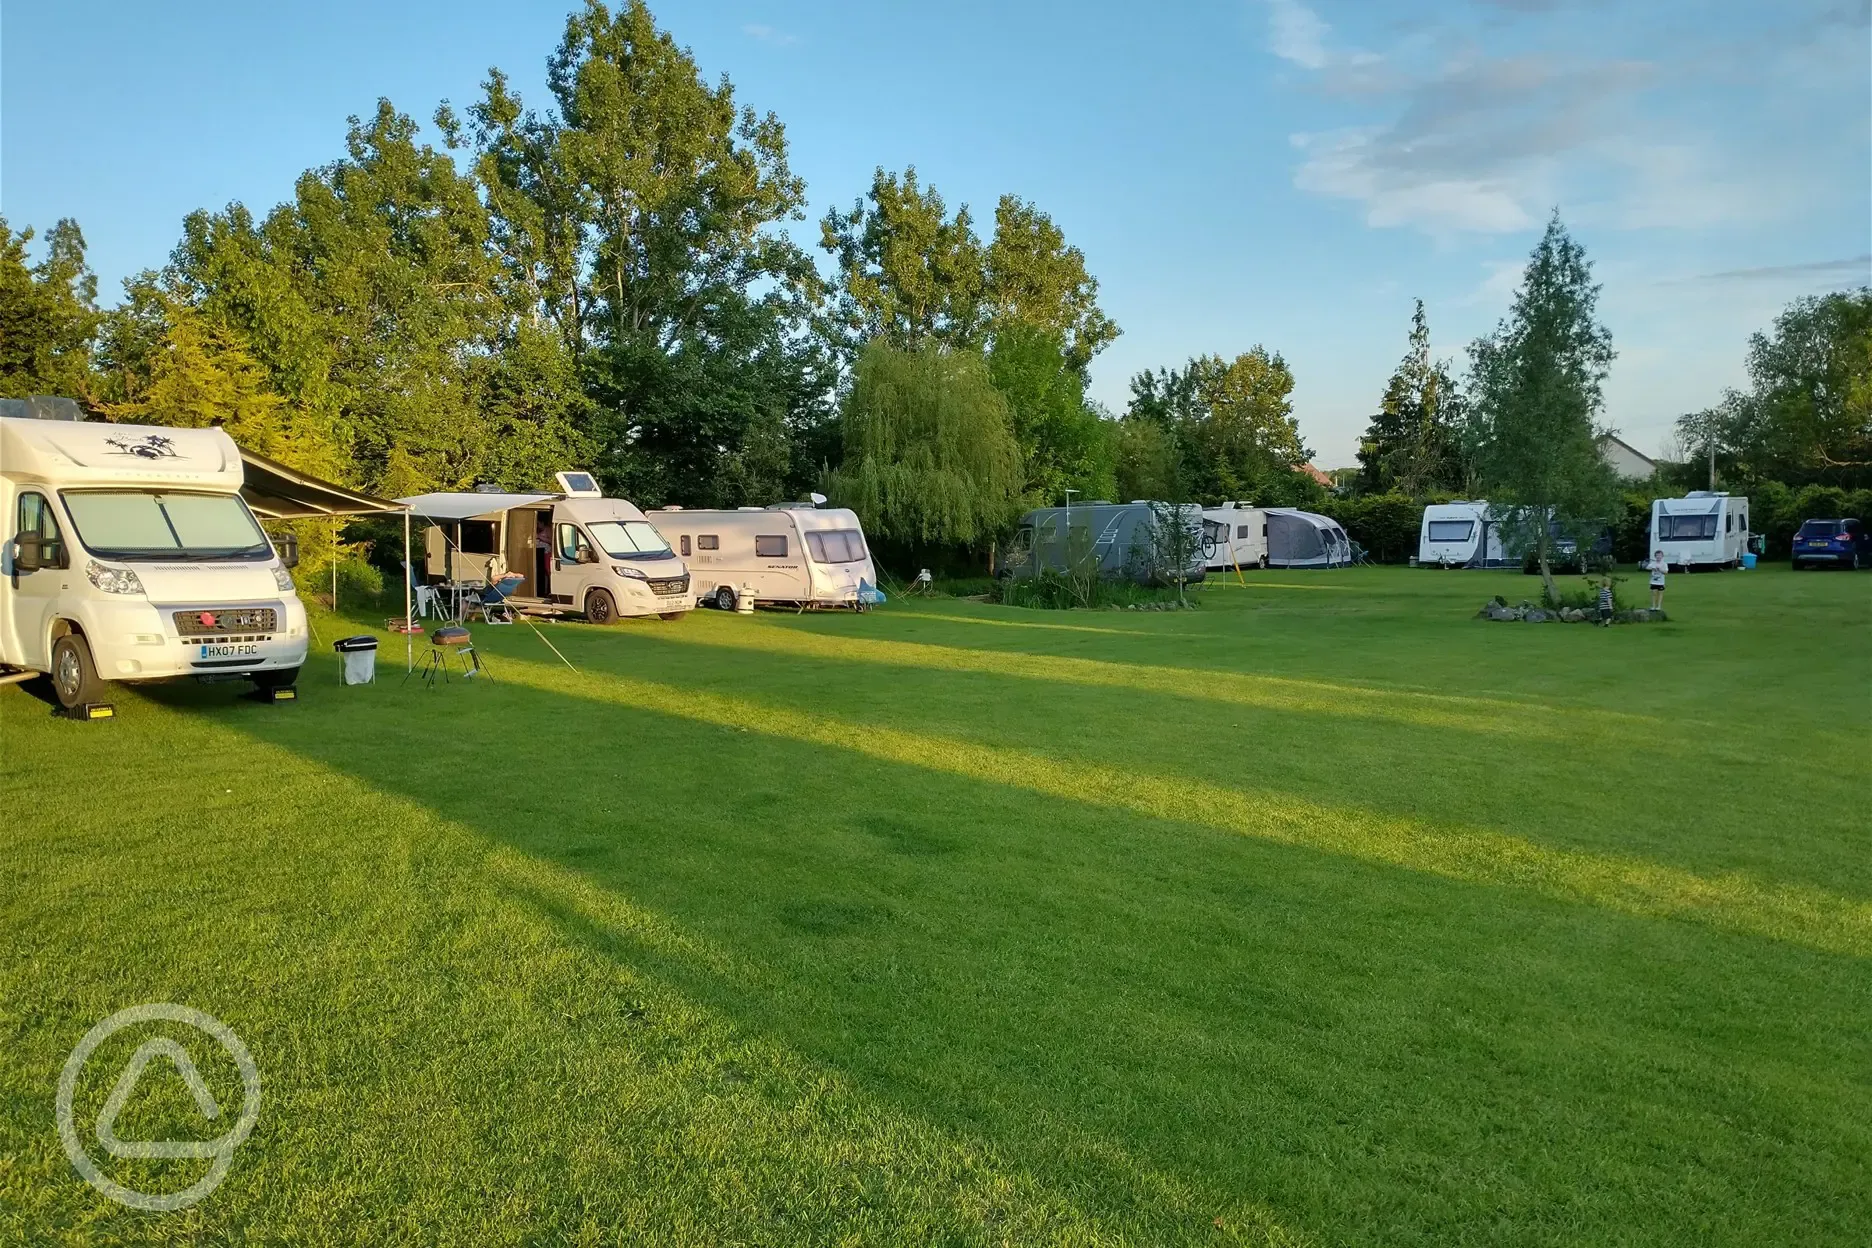 Camping and touring field